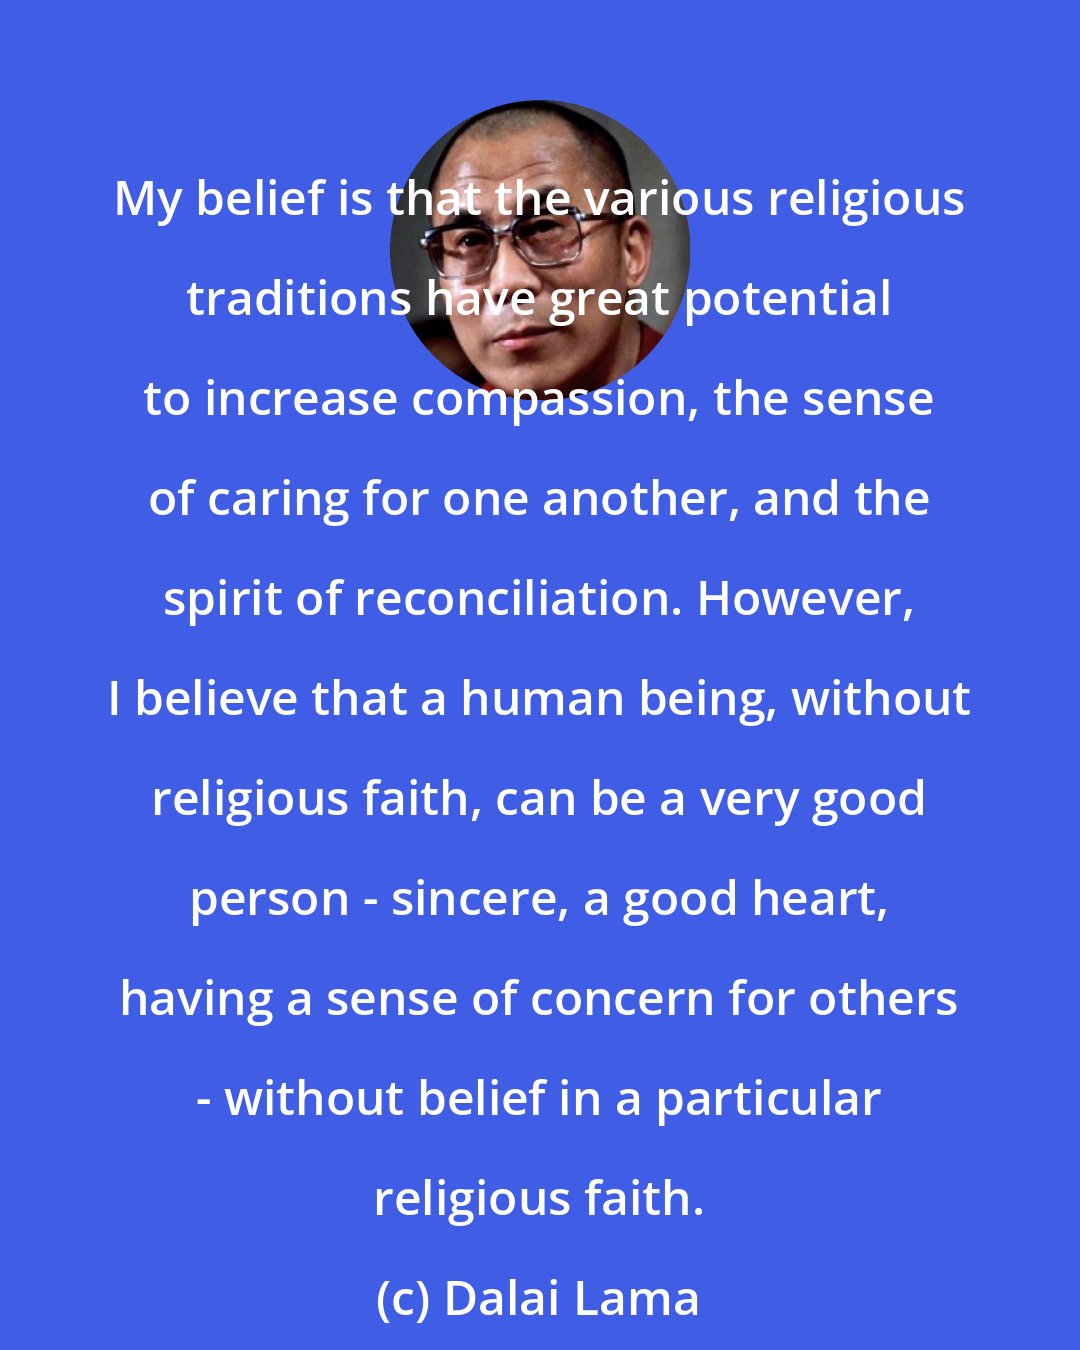 Dalai Lama: My belief is that the various religious traditions have great potential to increase compassion, the sense of caring for one another, and the spirit of reconciliation. However, I believe that a human being, without religious faith, can be a very good person - sincere, a good heart, having a sense of concern for others - without belief in a particular religious faith.